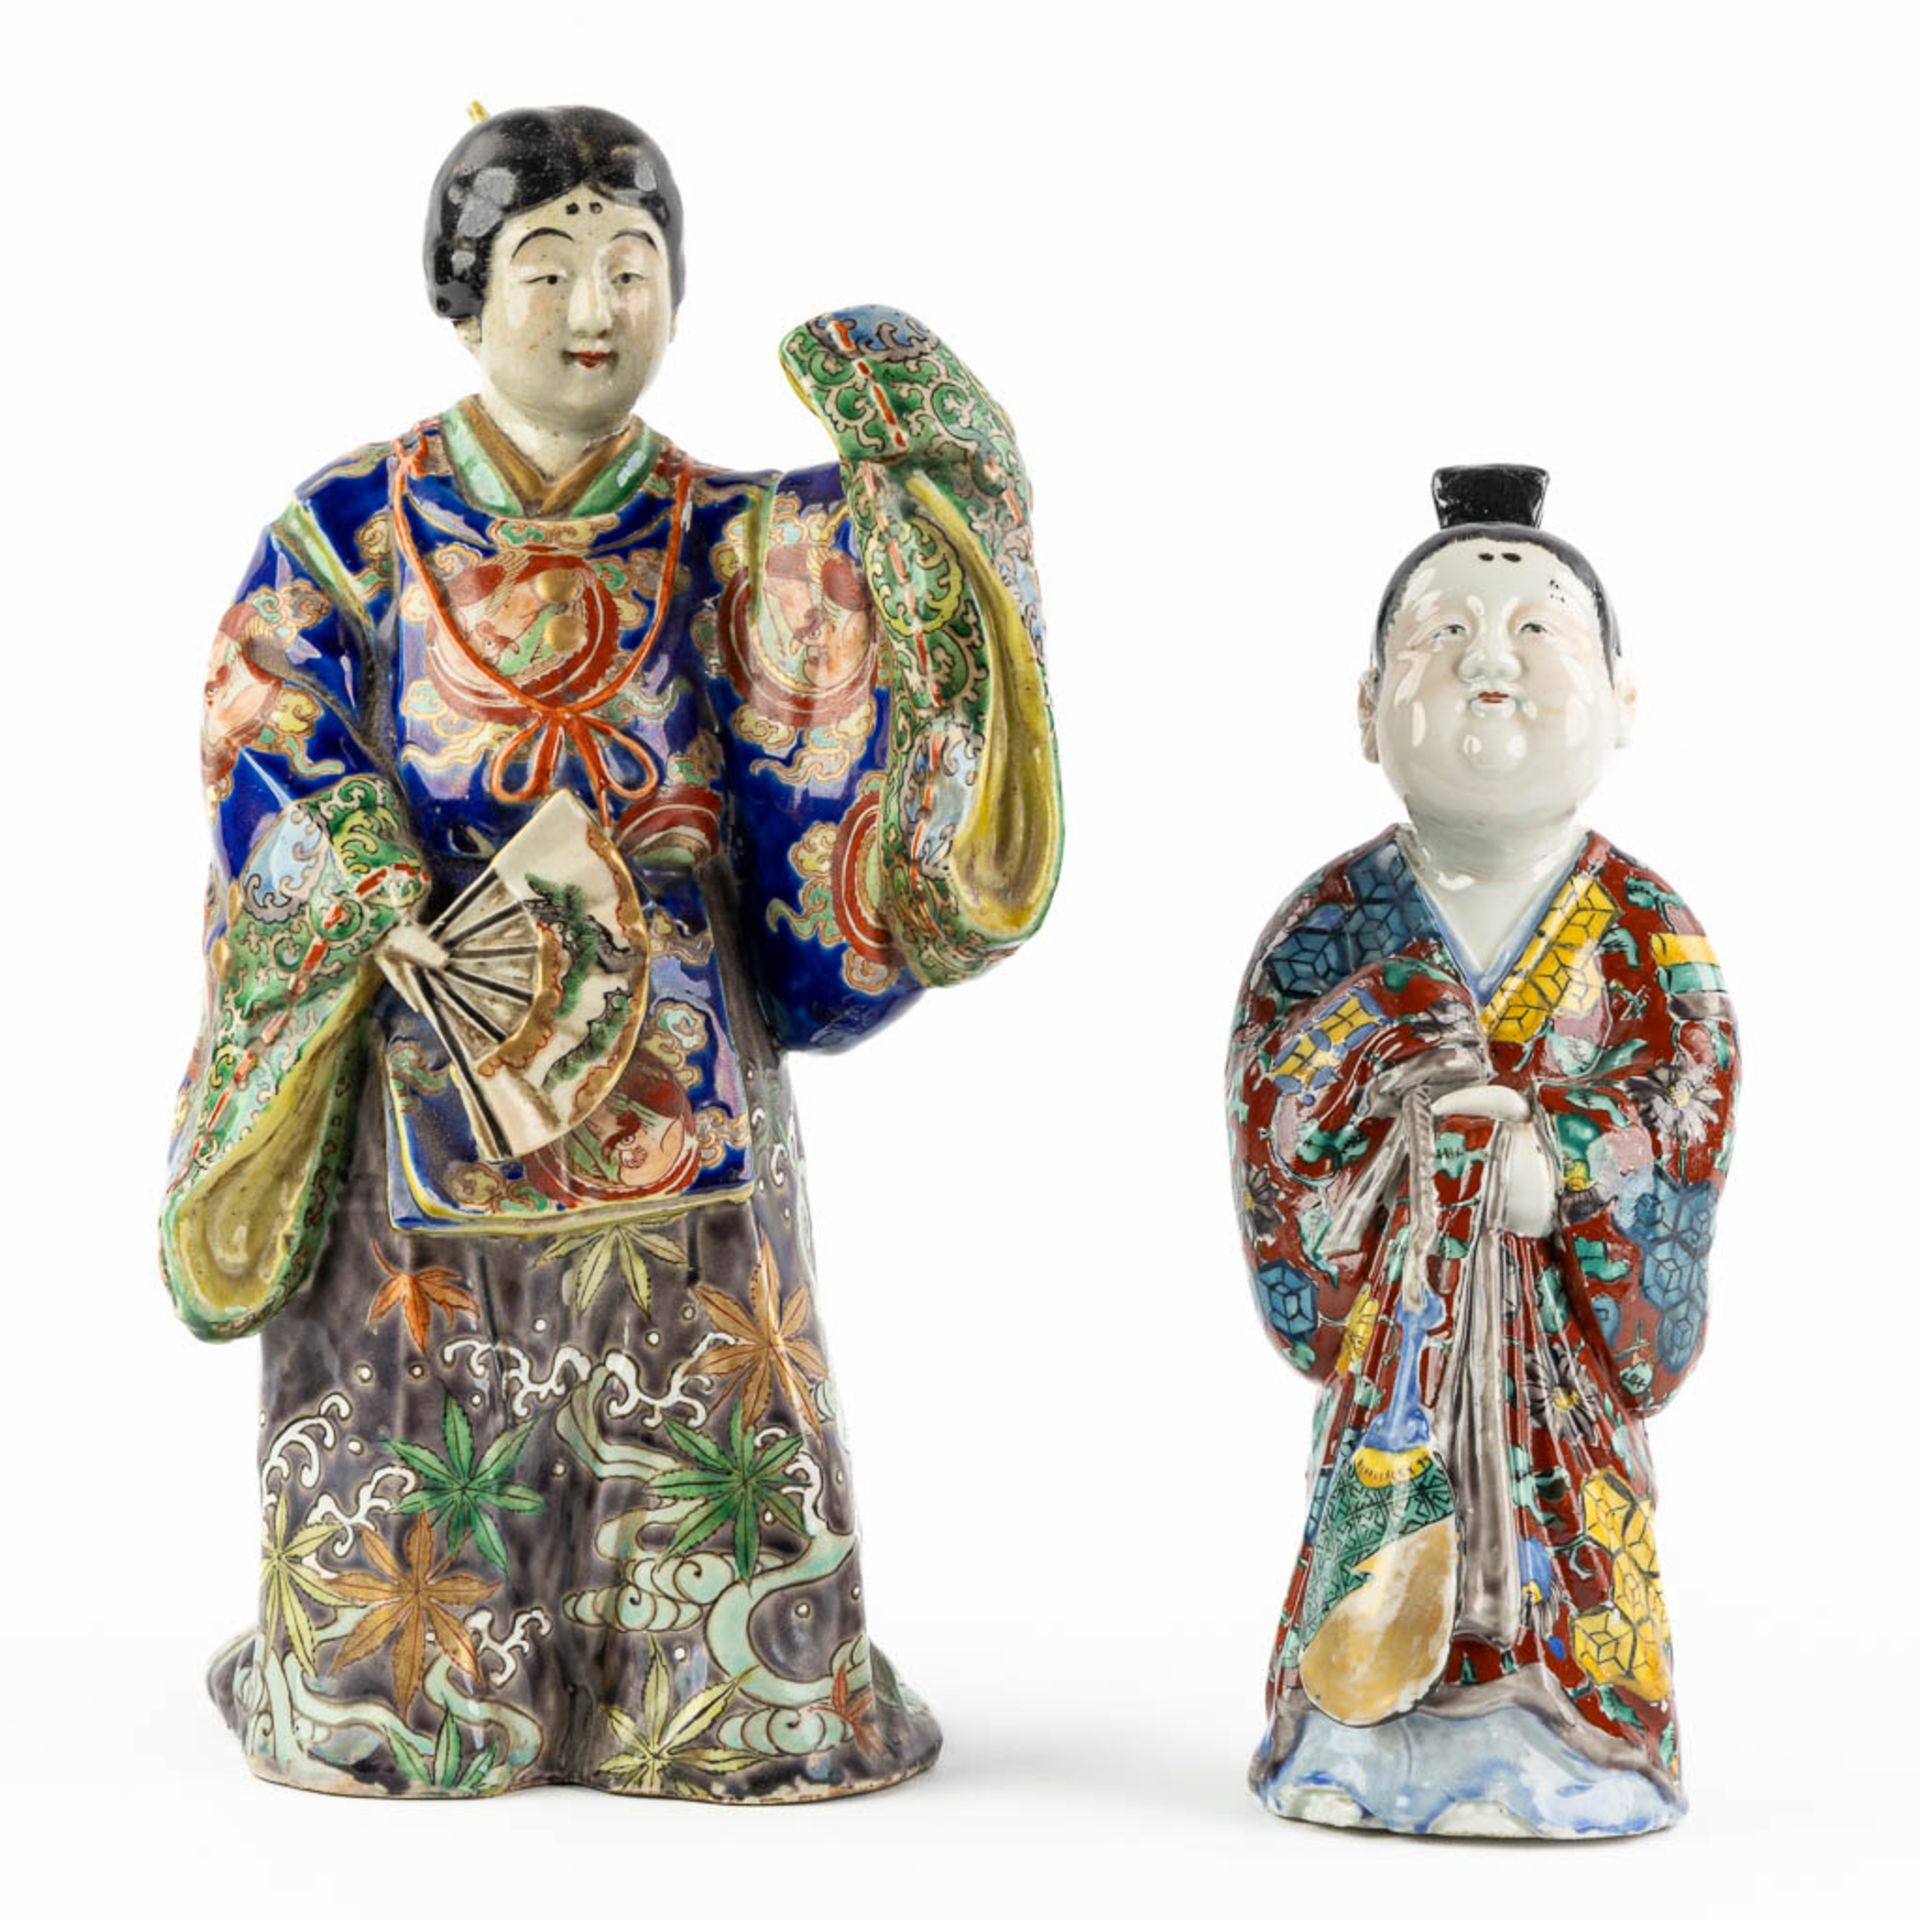 Two Japanese figurines, glazed stoneware. 19th/20th C. (L:14 x W:17 x H:32 cm) - Image 3 of 12